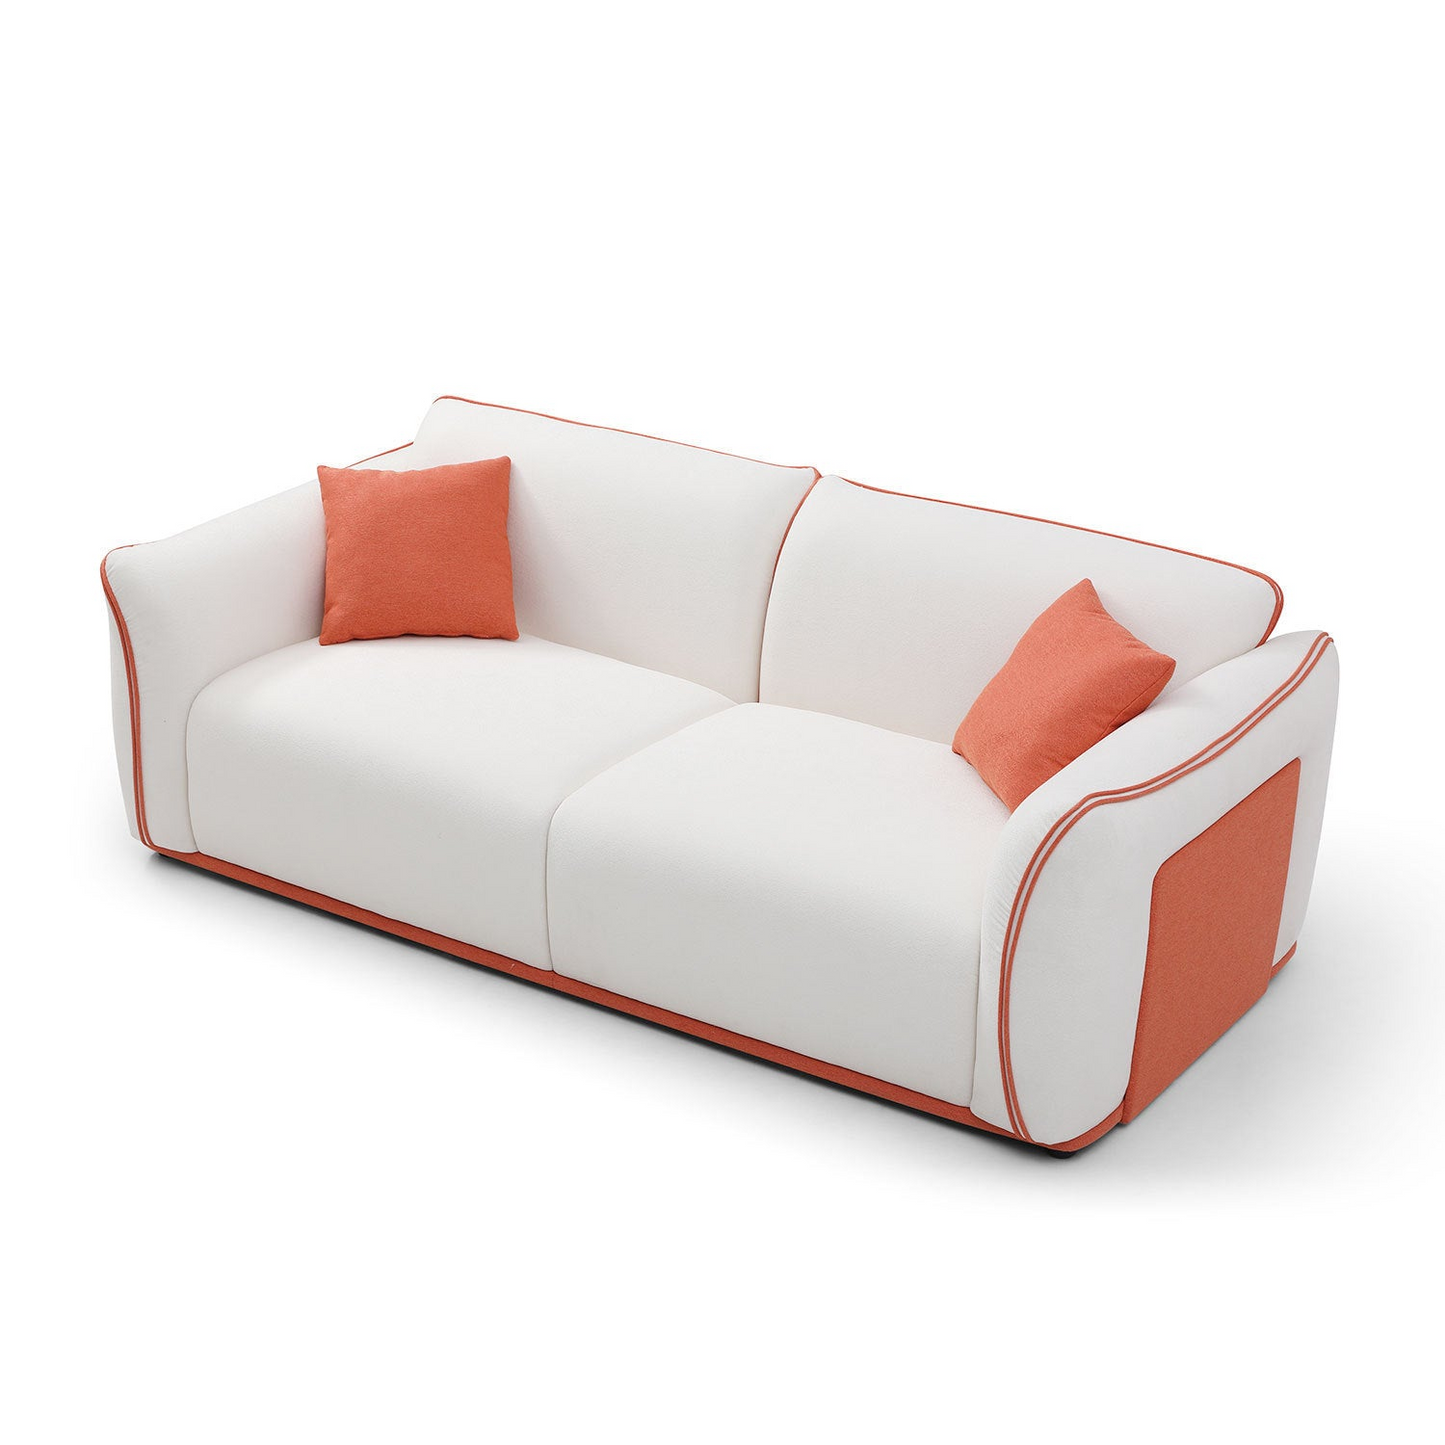 Beige Couch Upholstered Sofa, Modern Sofa for Living Room, Couch for Small Spaces., Goodies N Stuff